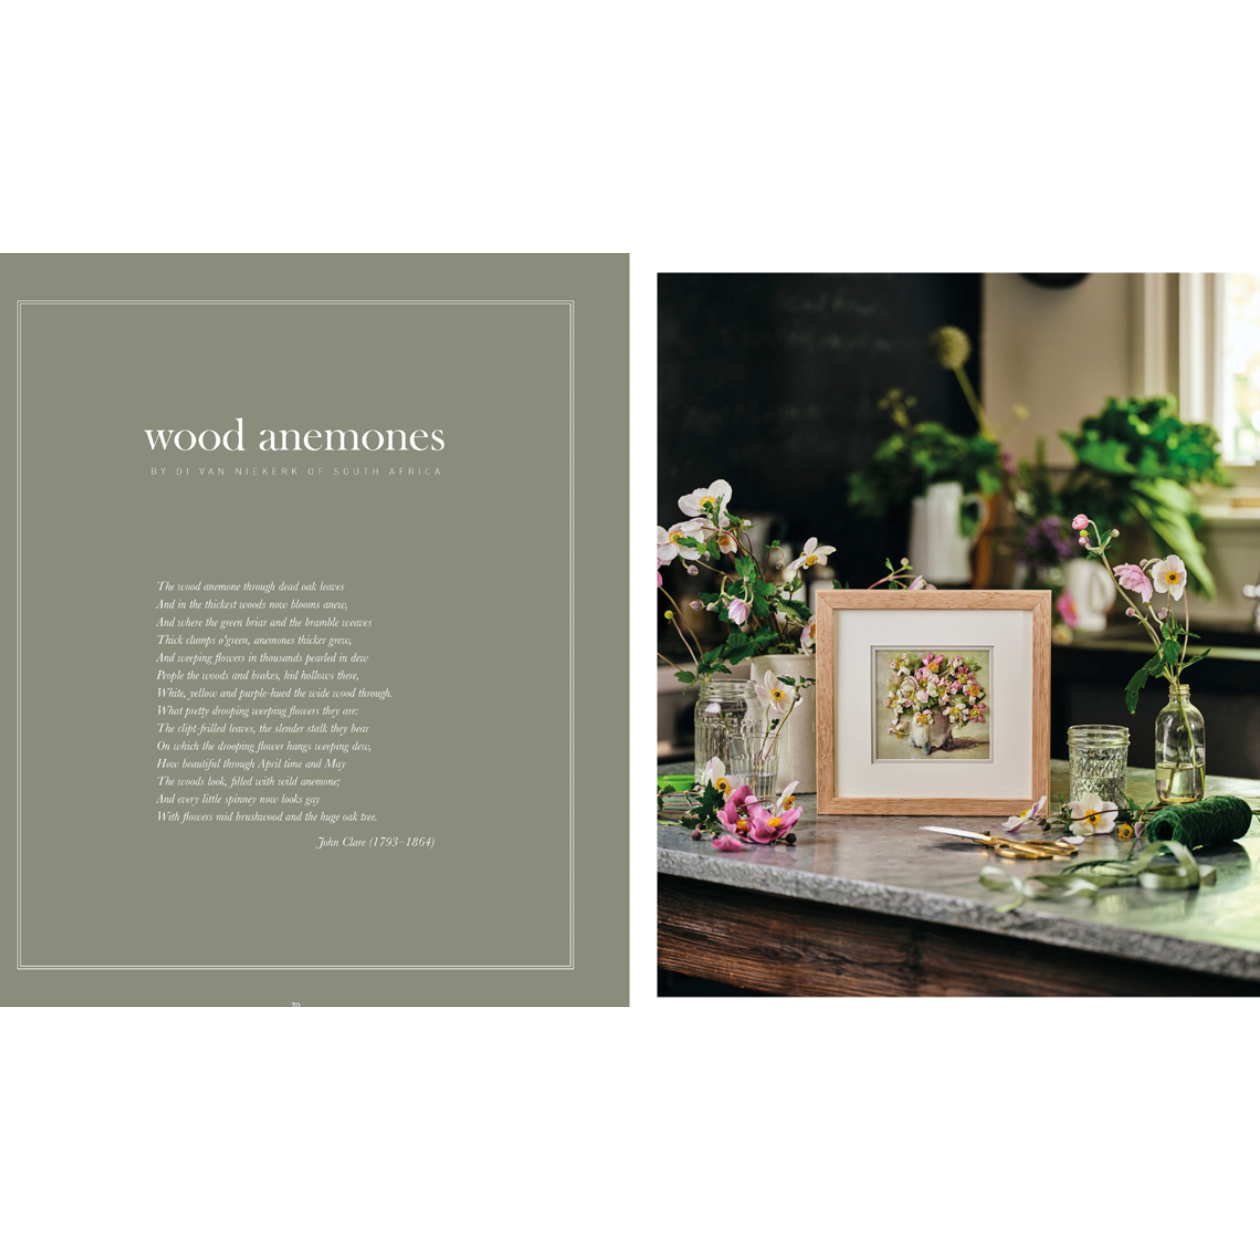 Inspirations A Passion for Needlework 4 ~ The Whitehouse Daylesford Printed Book